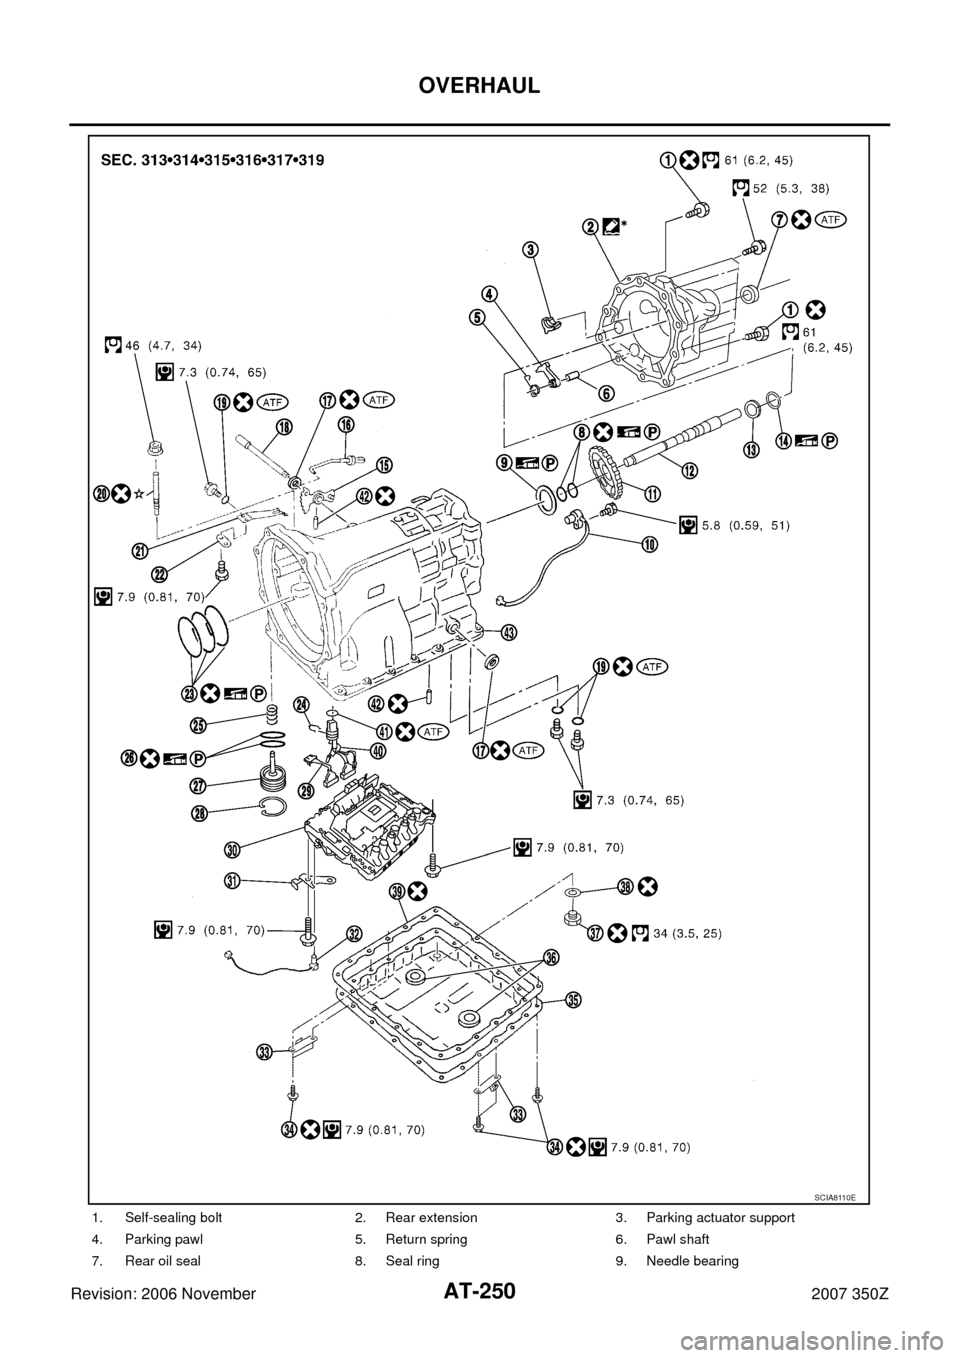 NISSAN 350Z 2007 Z33 Automatic Transmission Workshop Manual AT-250
OVERHAUL
Revision: 2006 November2007 350Z
1. Self-sealing bolt 2. Rear extension 3. Parking actuator support
4. Parking pawl 5. Return spring 6. Pawl shaft
7. Rear oil seal 8. Seal ring 9. Need